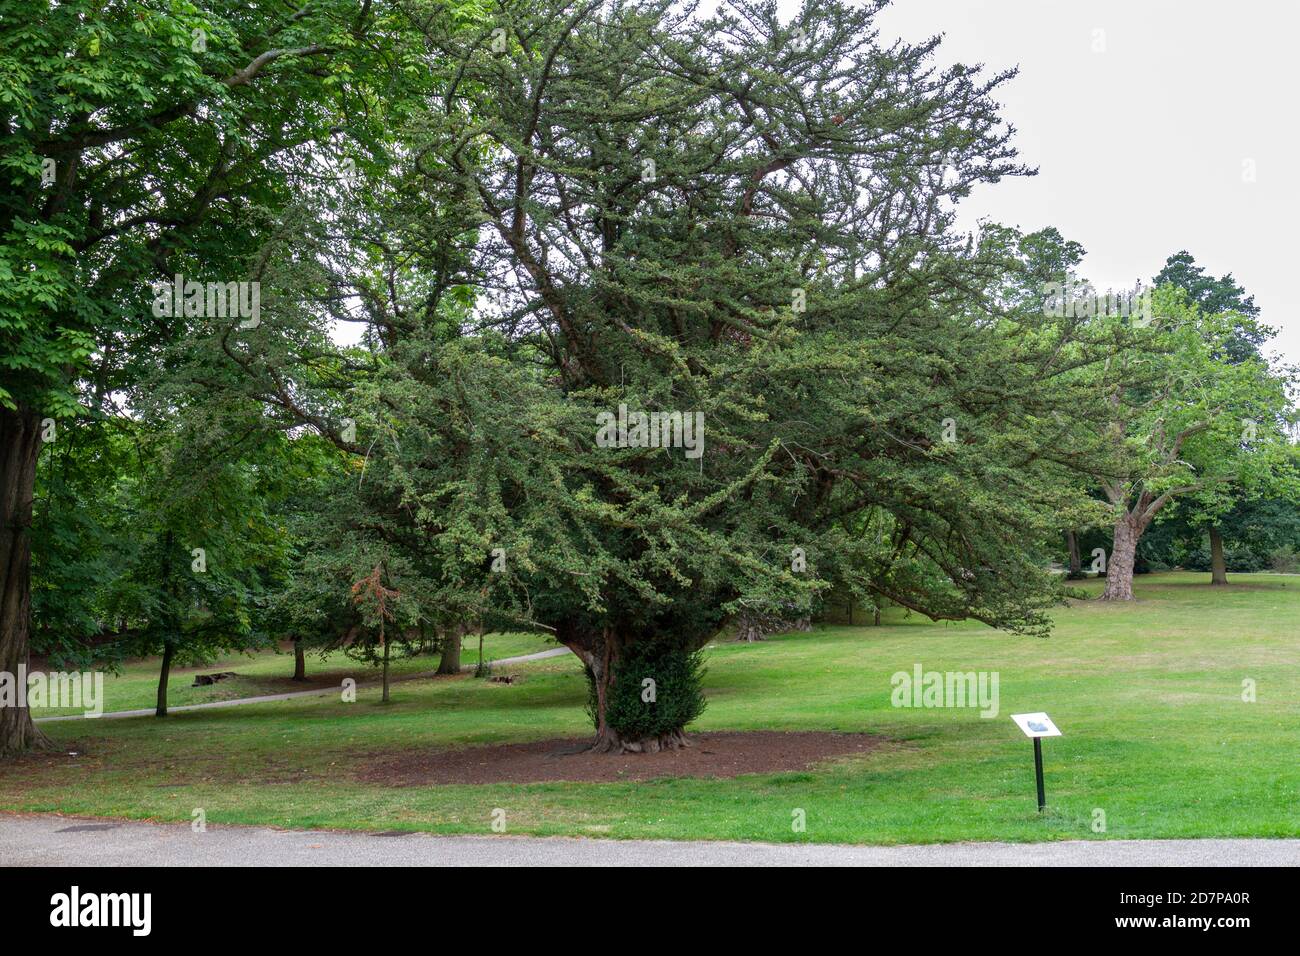 The oldest Yew tree (taxus baccata) thought to be over 600 years old, in Christchurch Park, Ipswich, Suffolk, UK (Aug 2020). Stock Photo